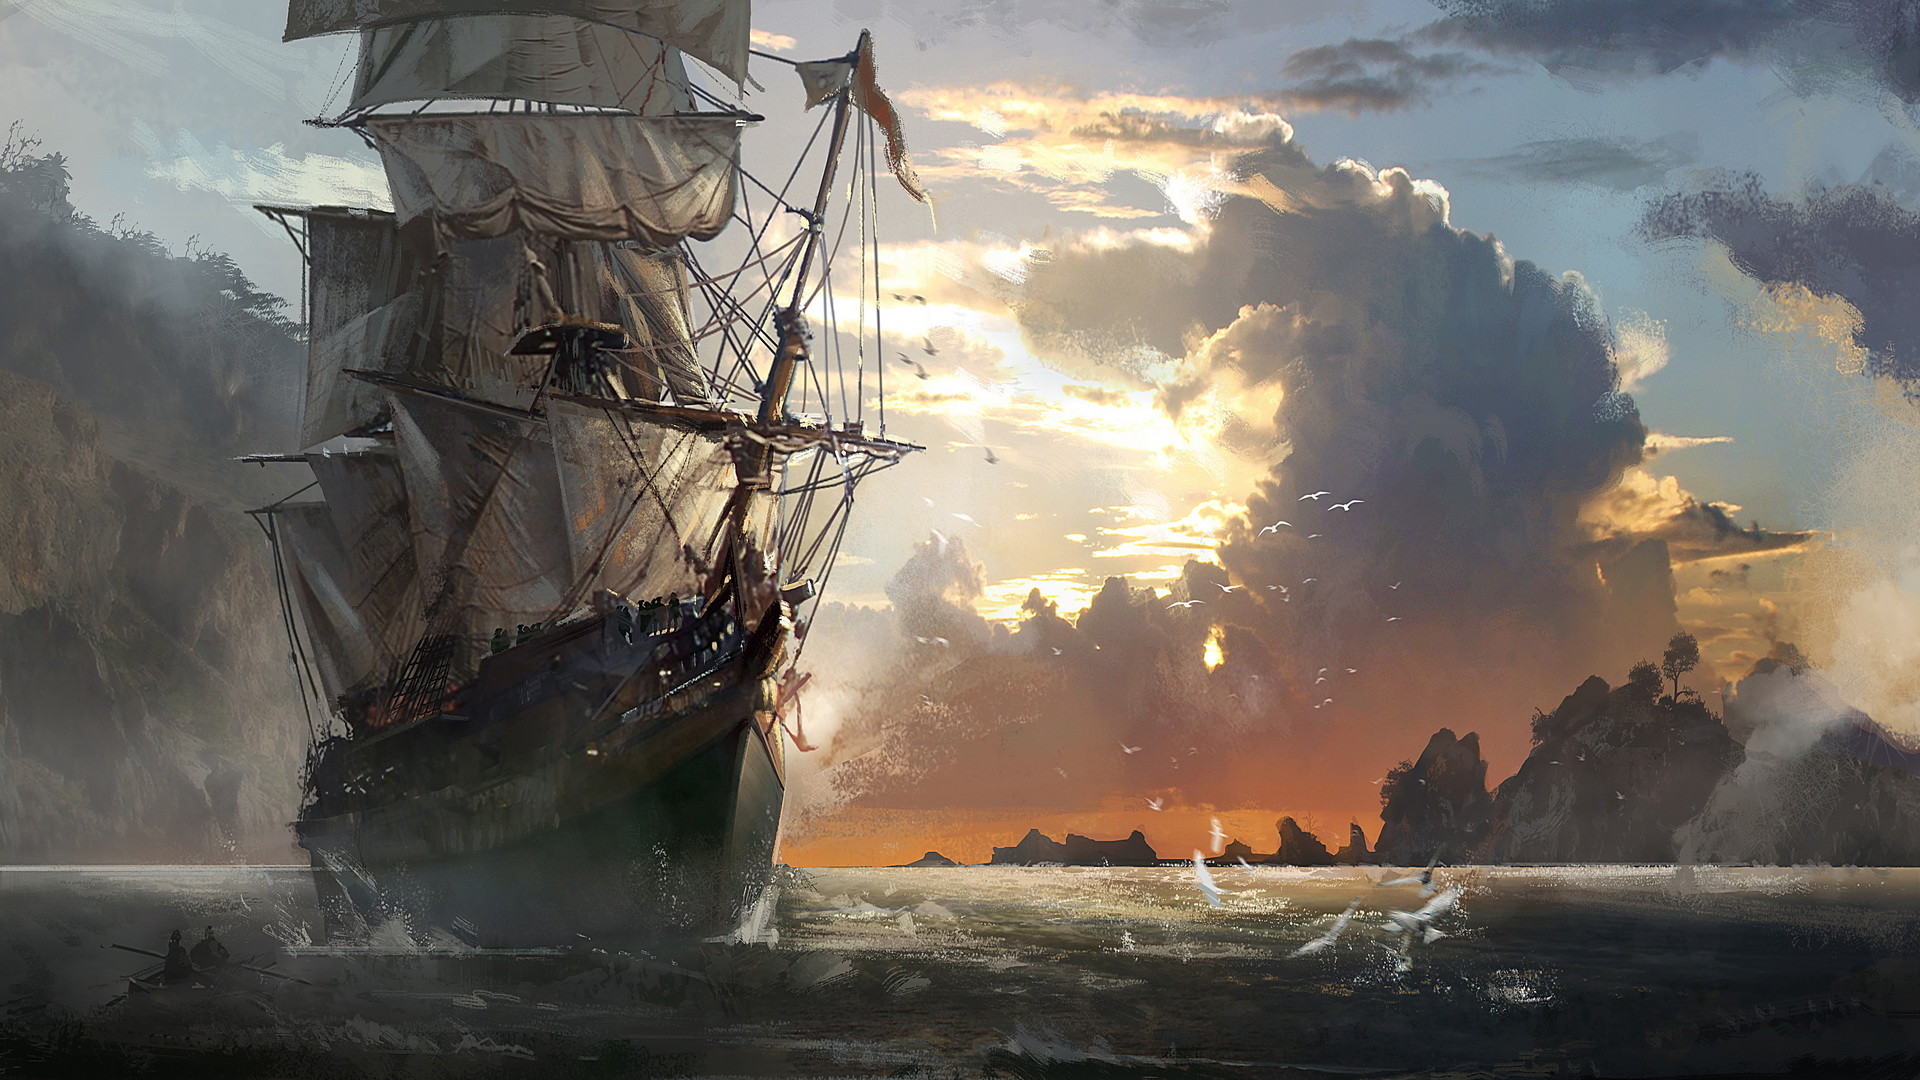 1920x1080, Ghost Pirate Ship Wallpapers Hd 
 Data Id - Pirate Ship Wallpaper Hd - HD Wallpaper 